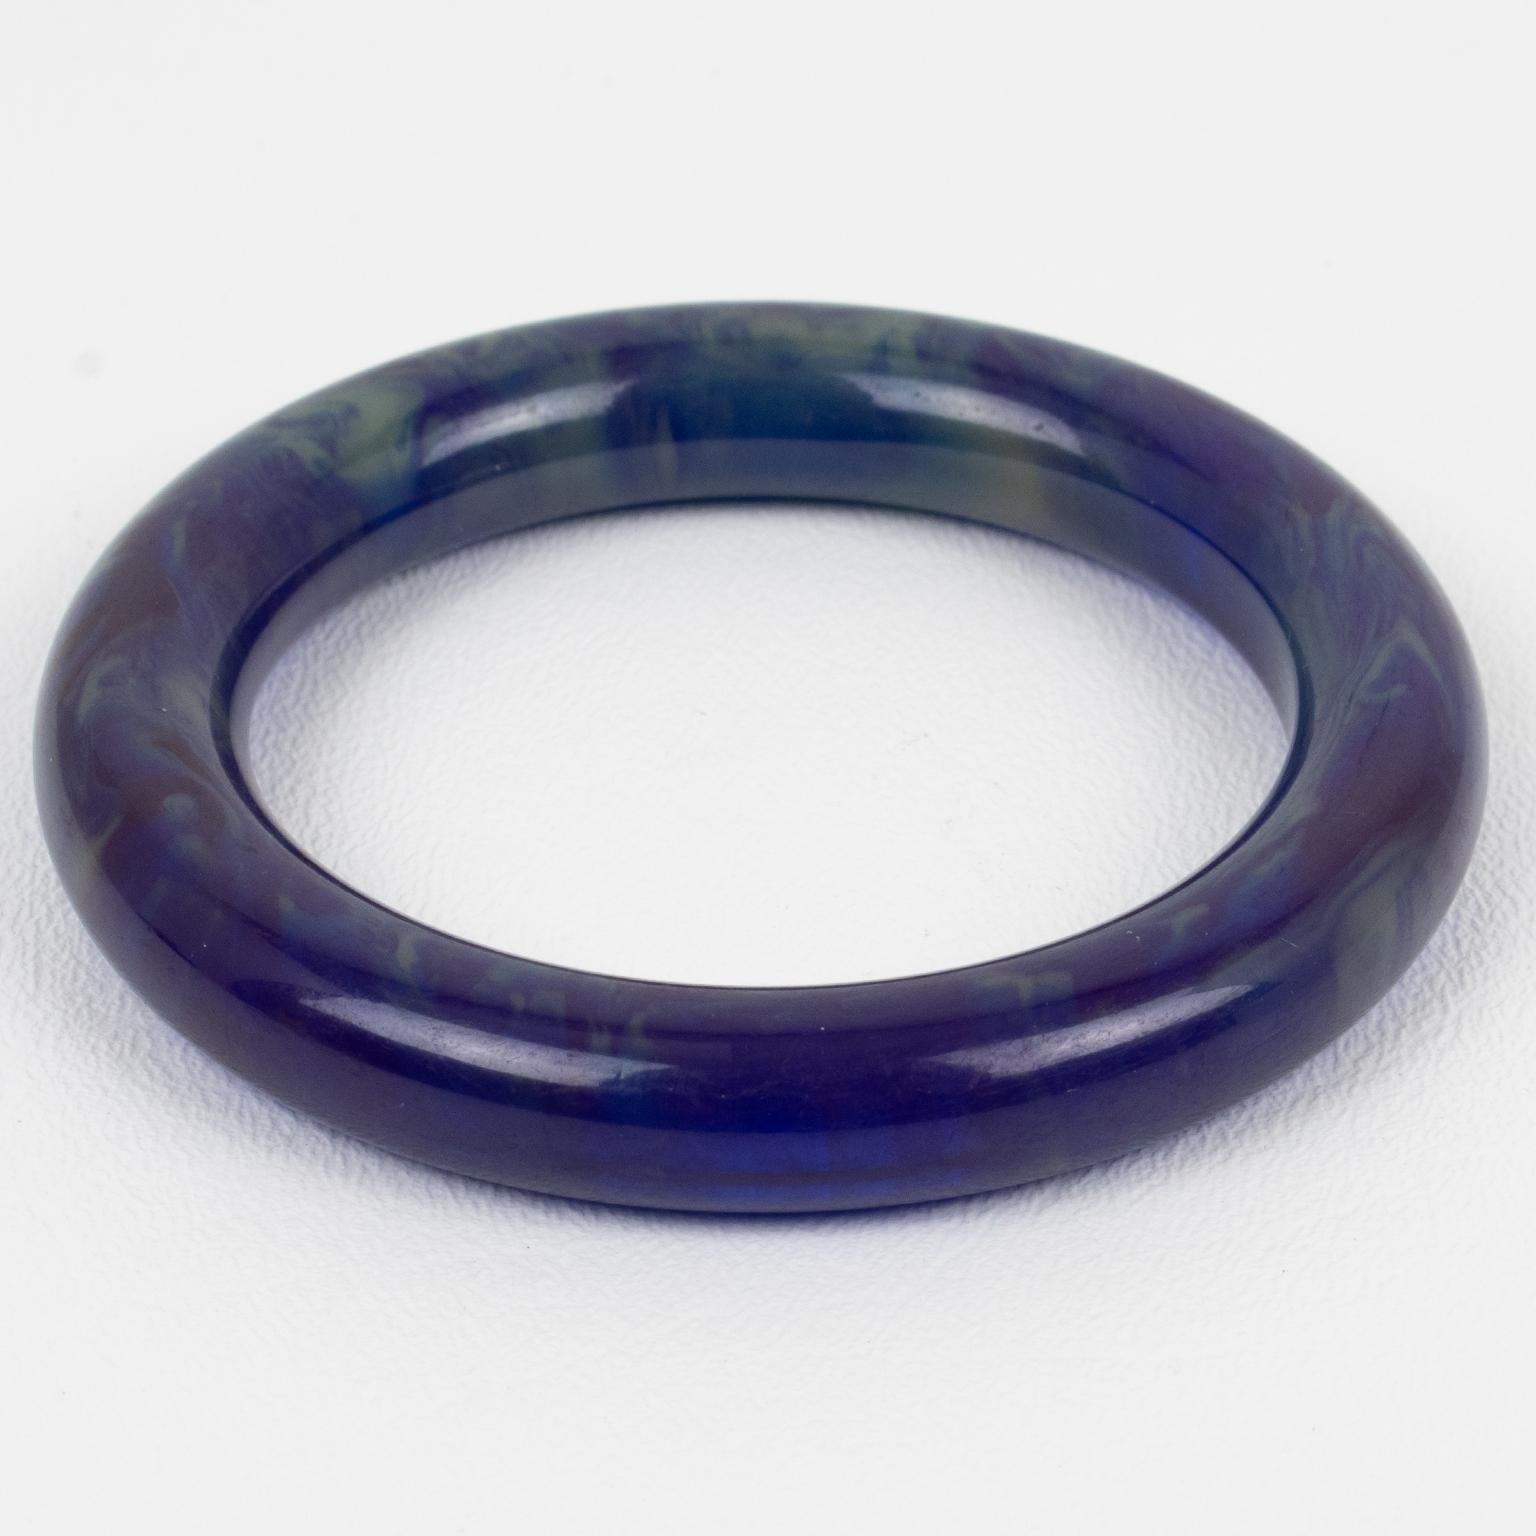 This lovely Bakelite bangle features a chunky tube shape with an intense purple-blue color and cloudy creamy custard swirling, also called inkspot color.
Measurements: Inside across is 2.38 in diameter (6 cm) - outside across is 3.25 in diameter